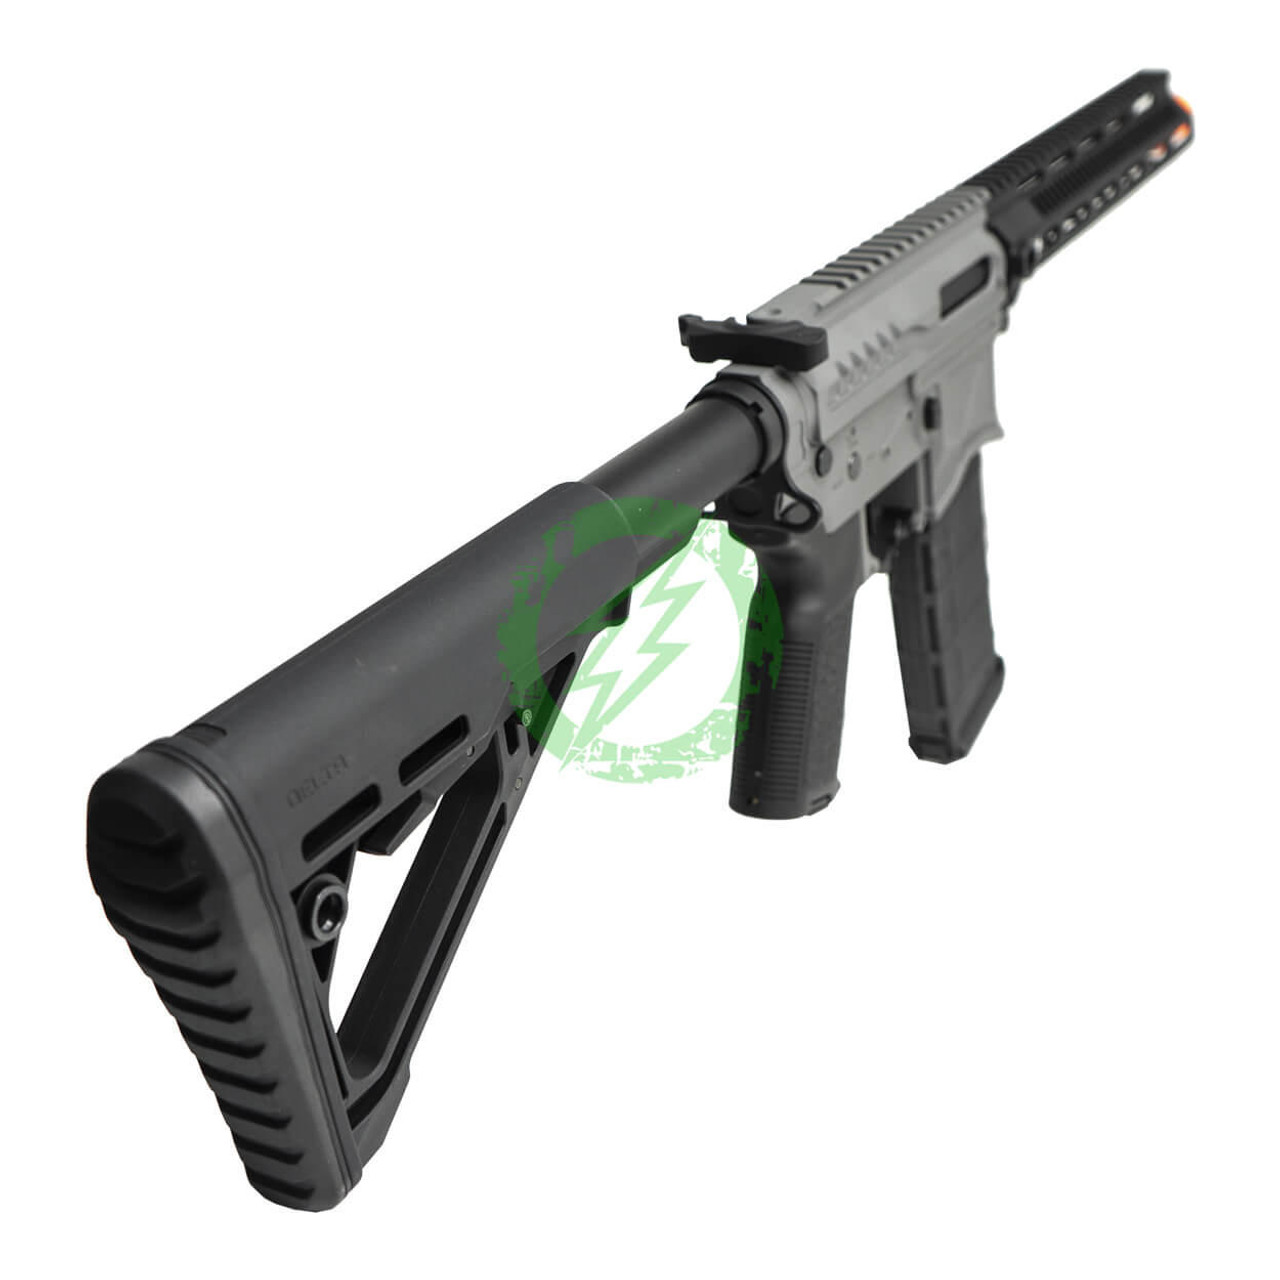  Zion Arms R15 Mod 0 Long Rail Airsoft Rifle with Delta Stock 